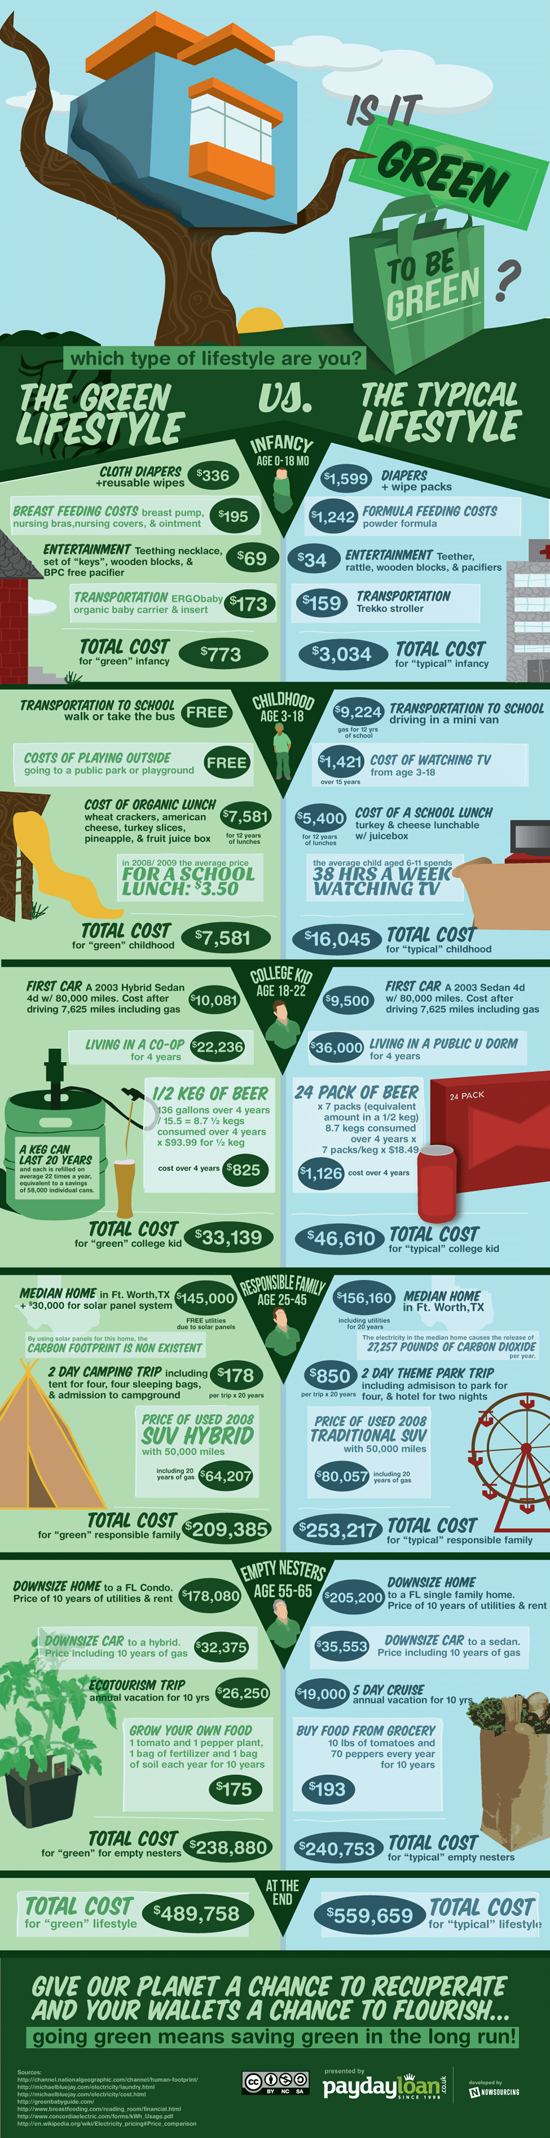 Infographic: Is it green to be green